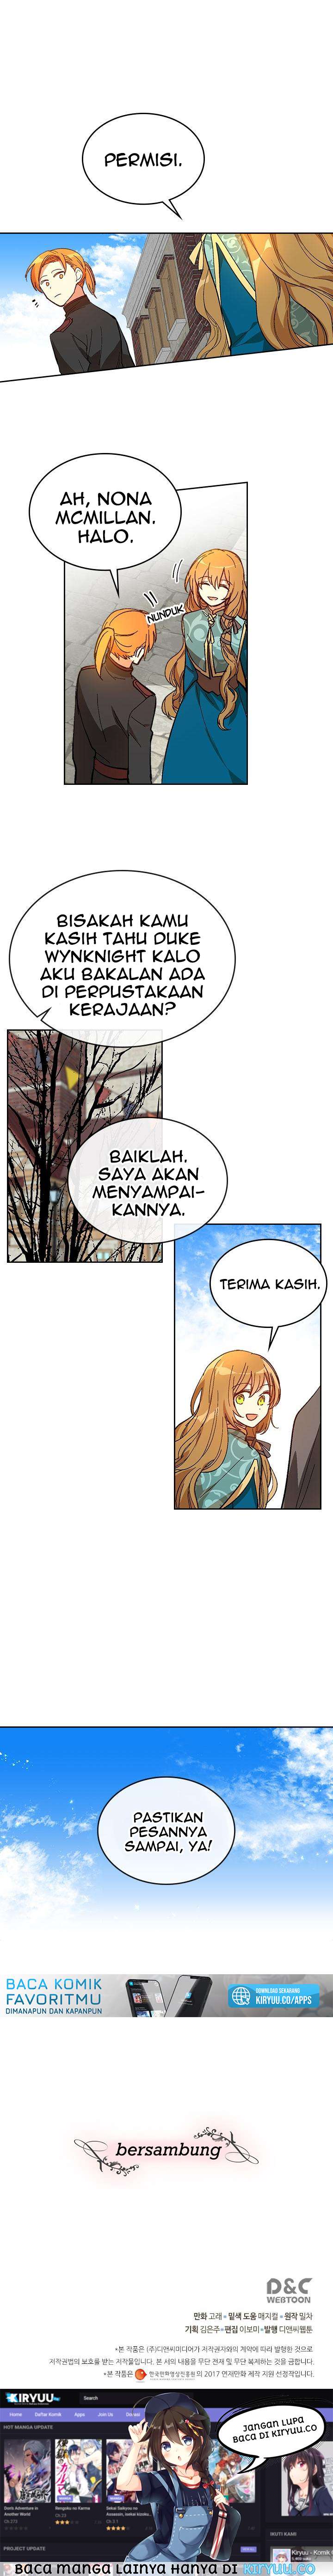 The Reason Why Raeliana Ended Up at the Duke’s Mansion Chapter 100 Bahasa Indonesia